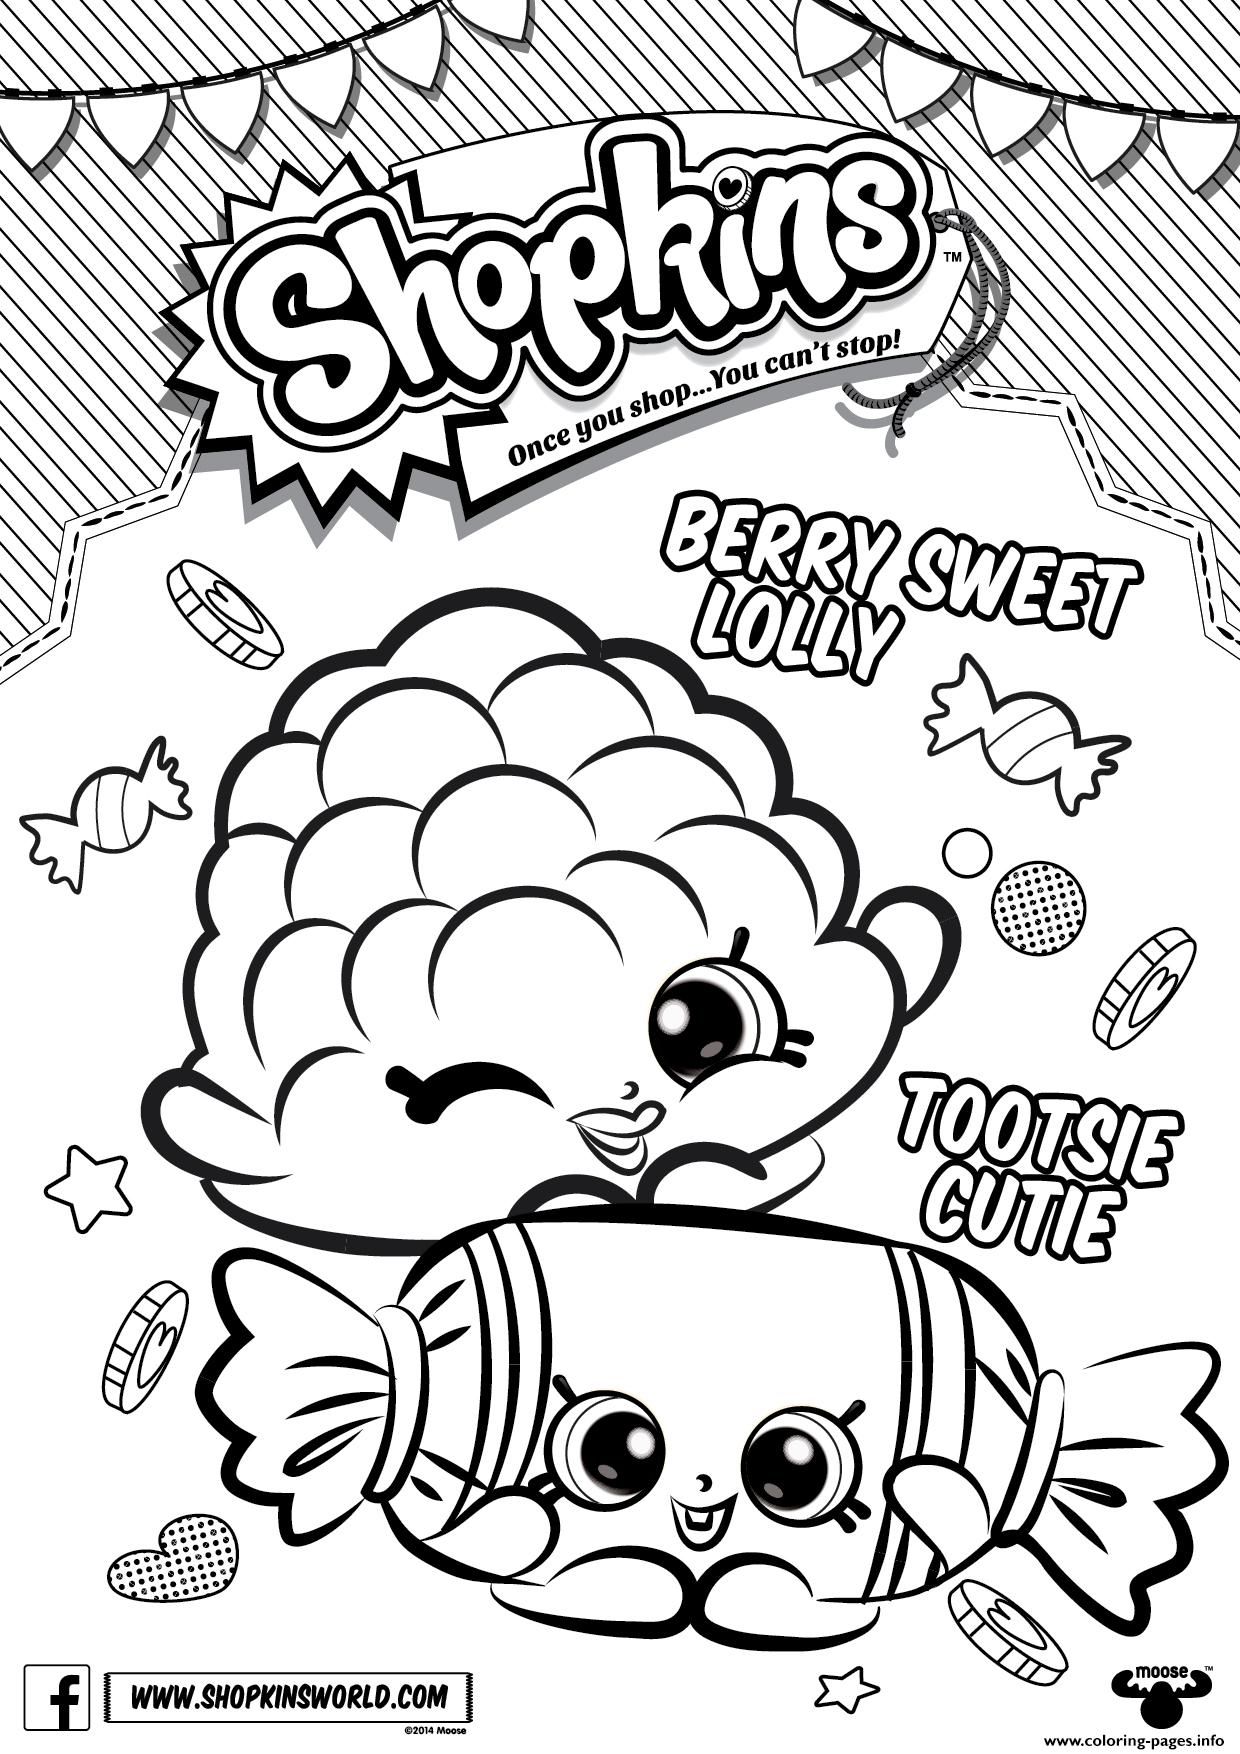 Print shopkins berry sweet lolly coloring pages | Shopkins colouring pages,  Shopkin coloring pages, Shopkins birthday party